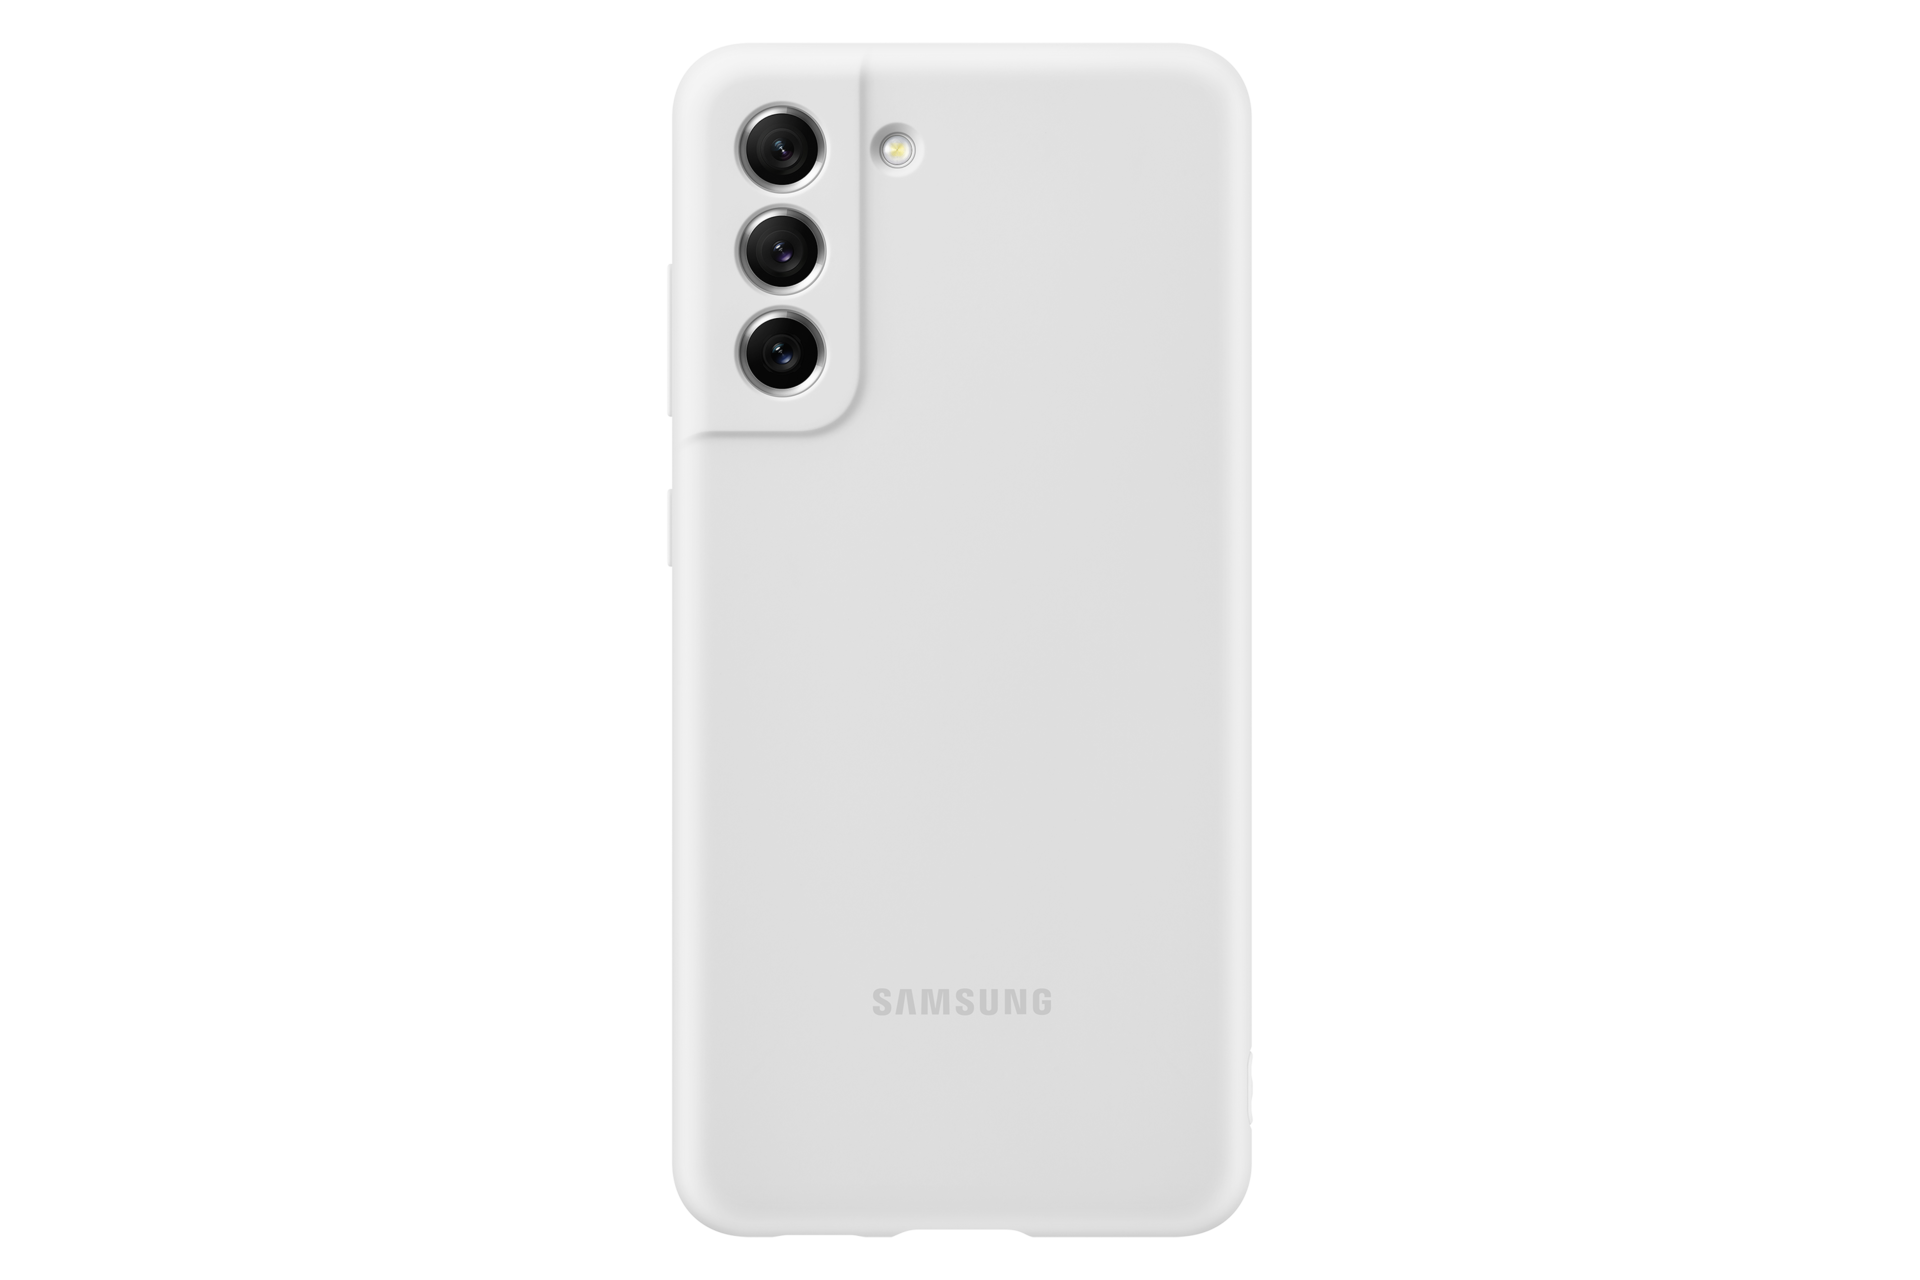 Samsung Galaxy S21 Series 5G Launches In-Store and Online Across Canada;  follows recent release of Samsung Galaxy Buds Pro – Samsung Newsroom Canada